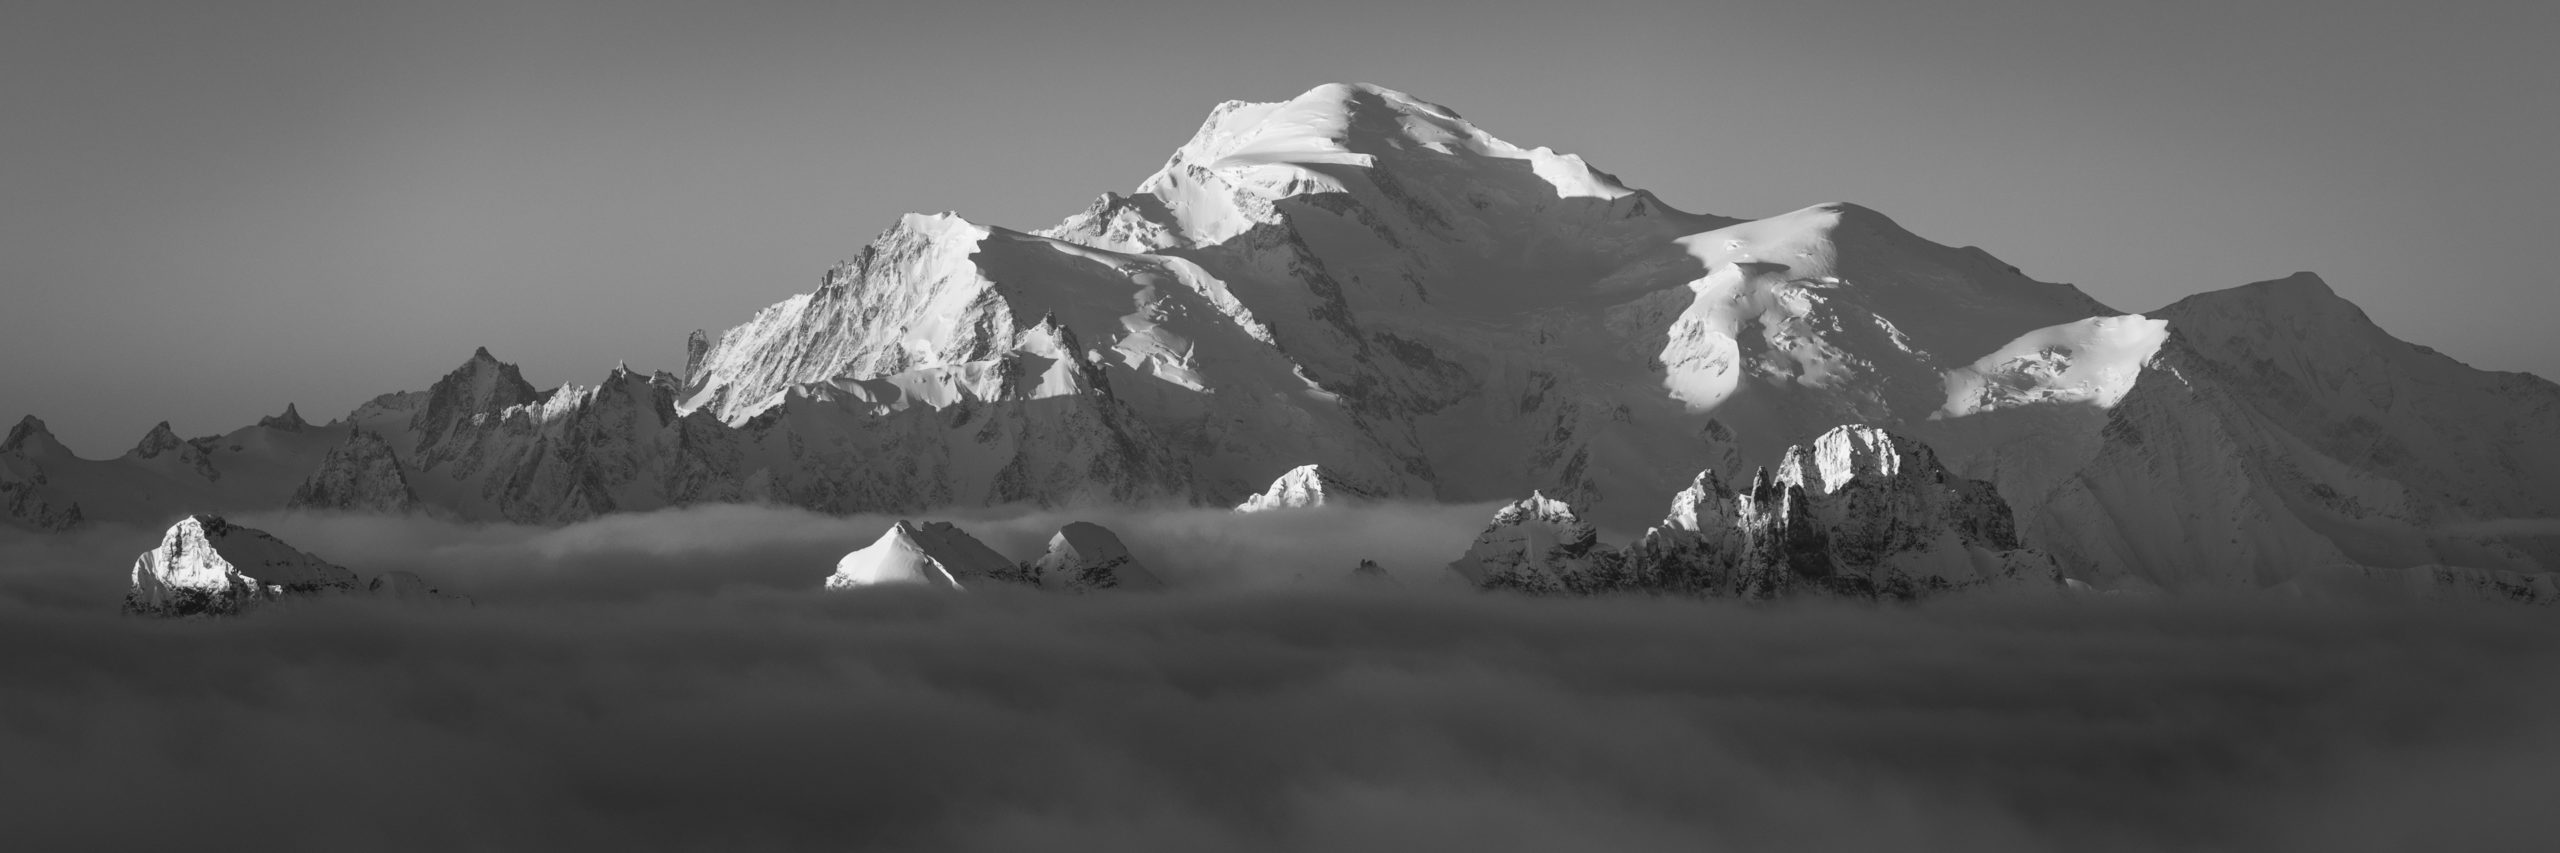 panoramic Mont-Blanc massif - black and white photo - mountain above the sea of clouds